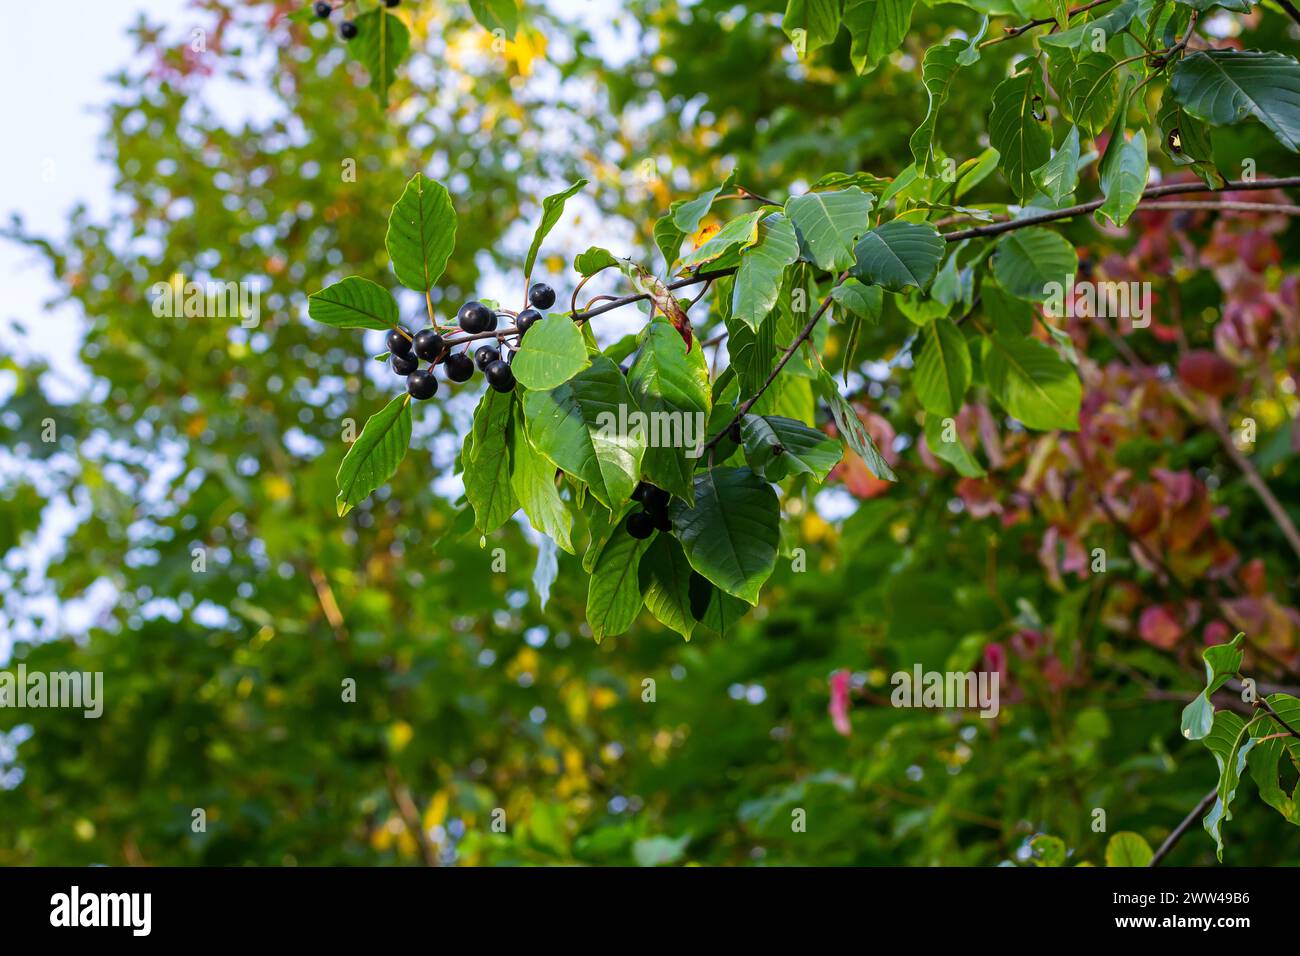 Leaves and fruits of the medicinal shrub Frangula alnus, Rhamnus frangula with poisonous black and red berries closeup. Stock Photo